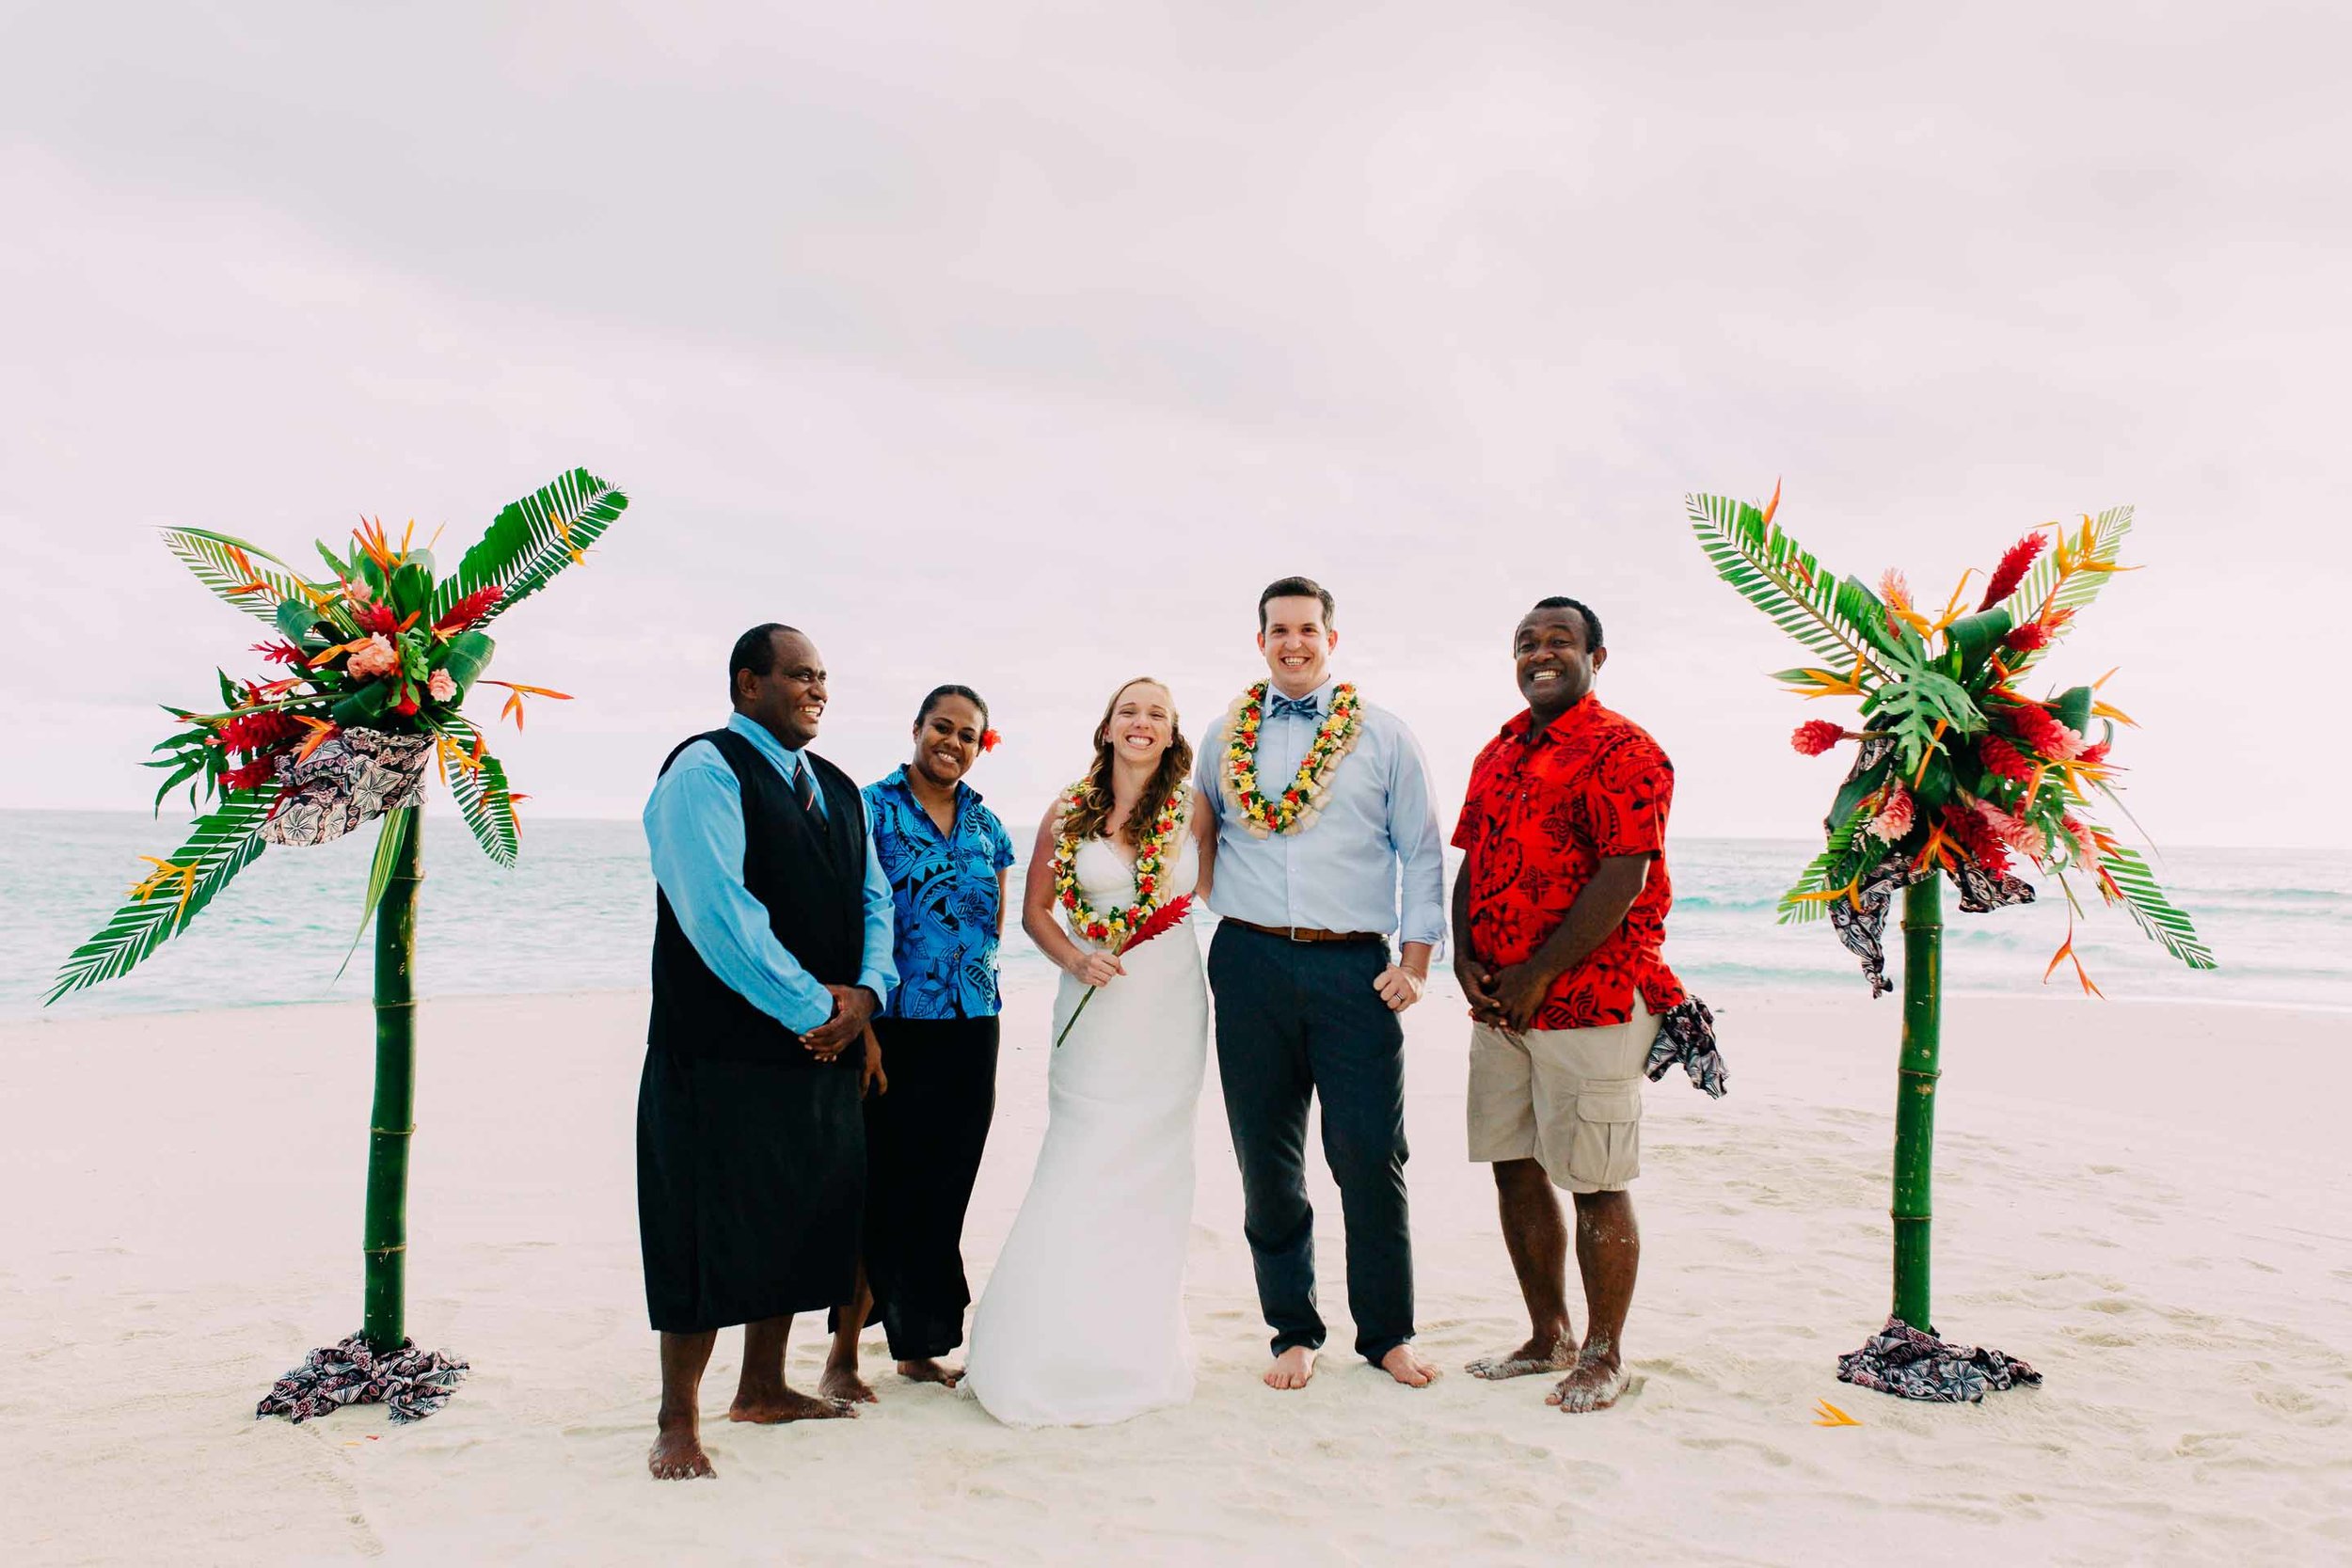 Royal Davui staff pose with the happy newlyweds on the sand quay after the ceremony.